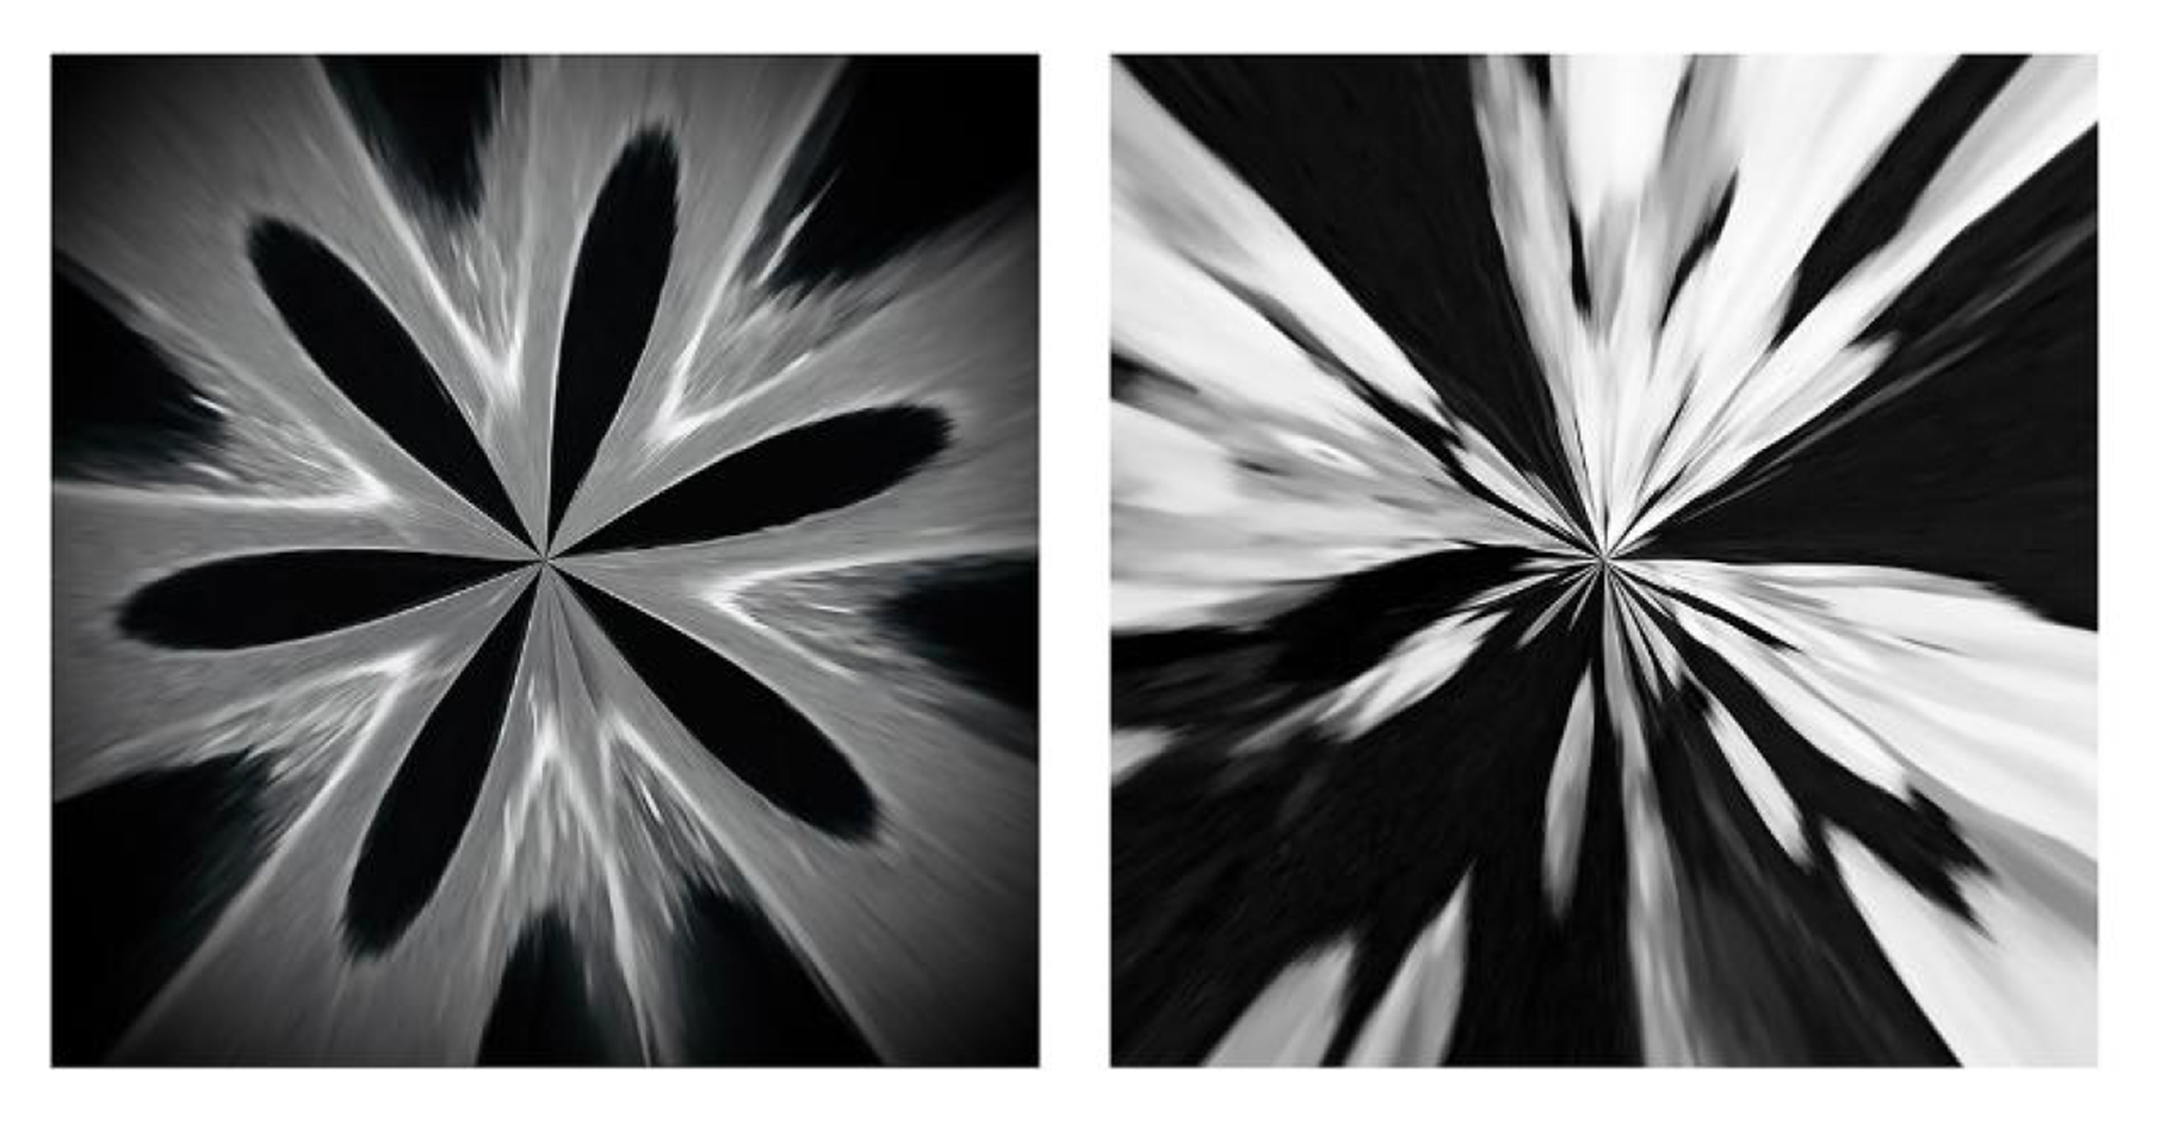 Two black and white photos, side by side, both of abstract star-like shapes